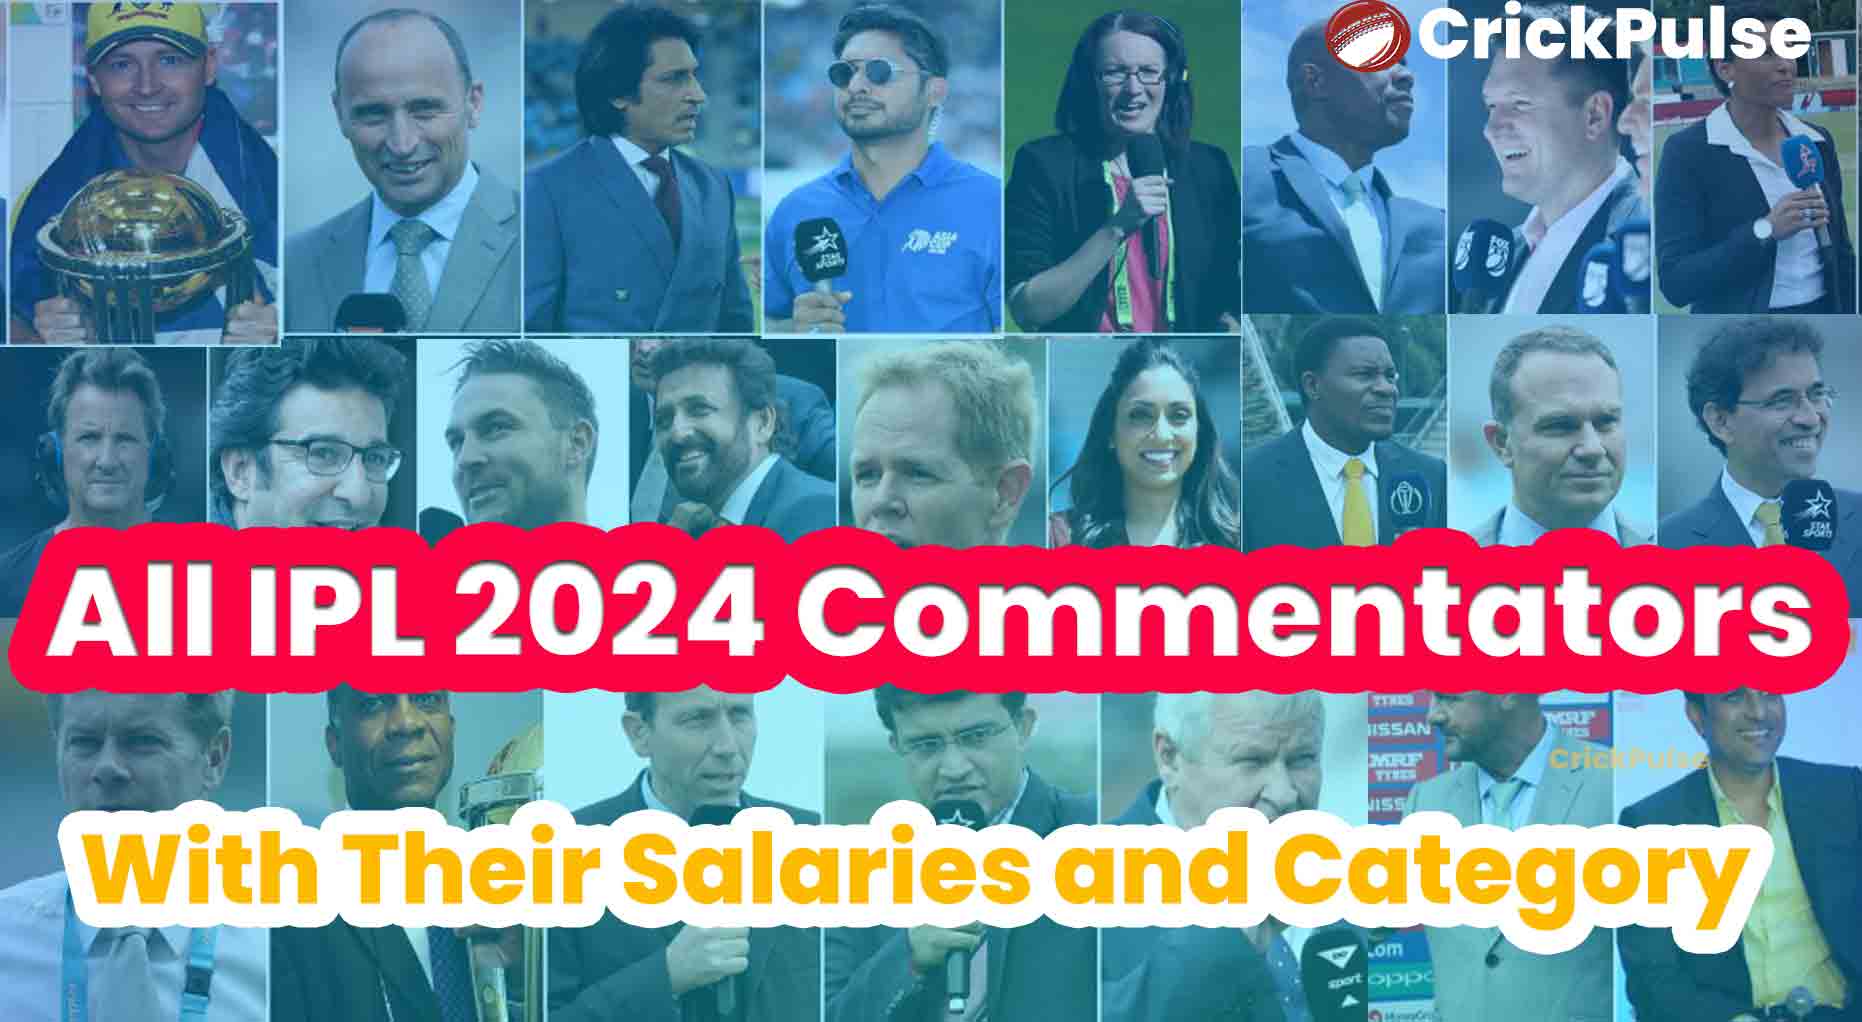 All IPL 2024 Commentators With Their Salaries and Category